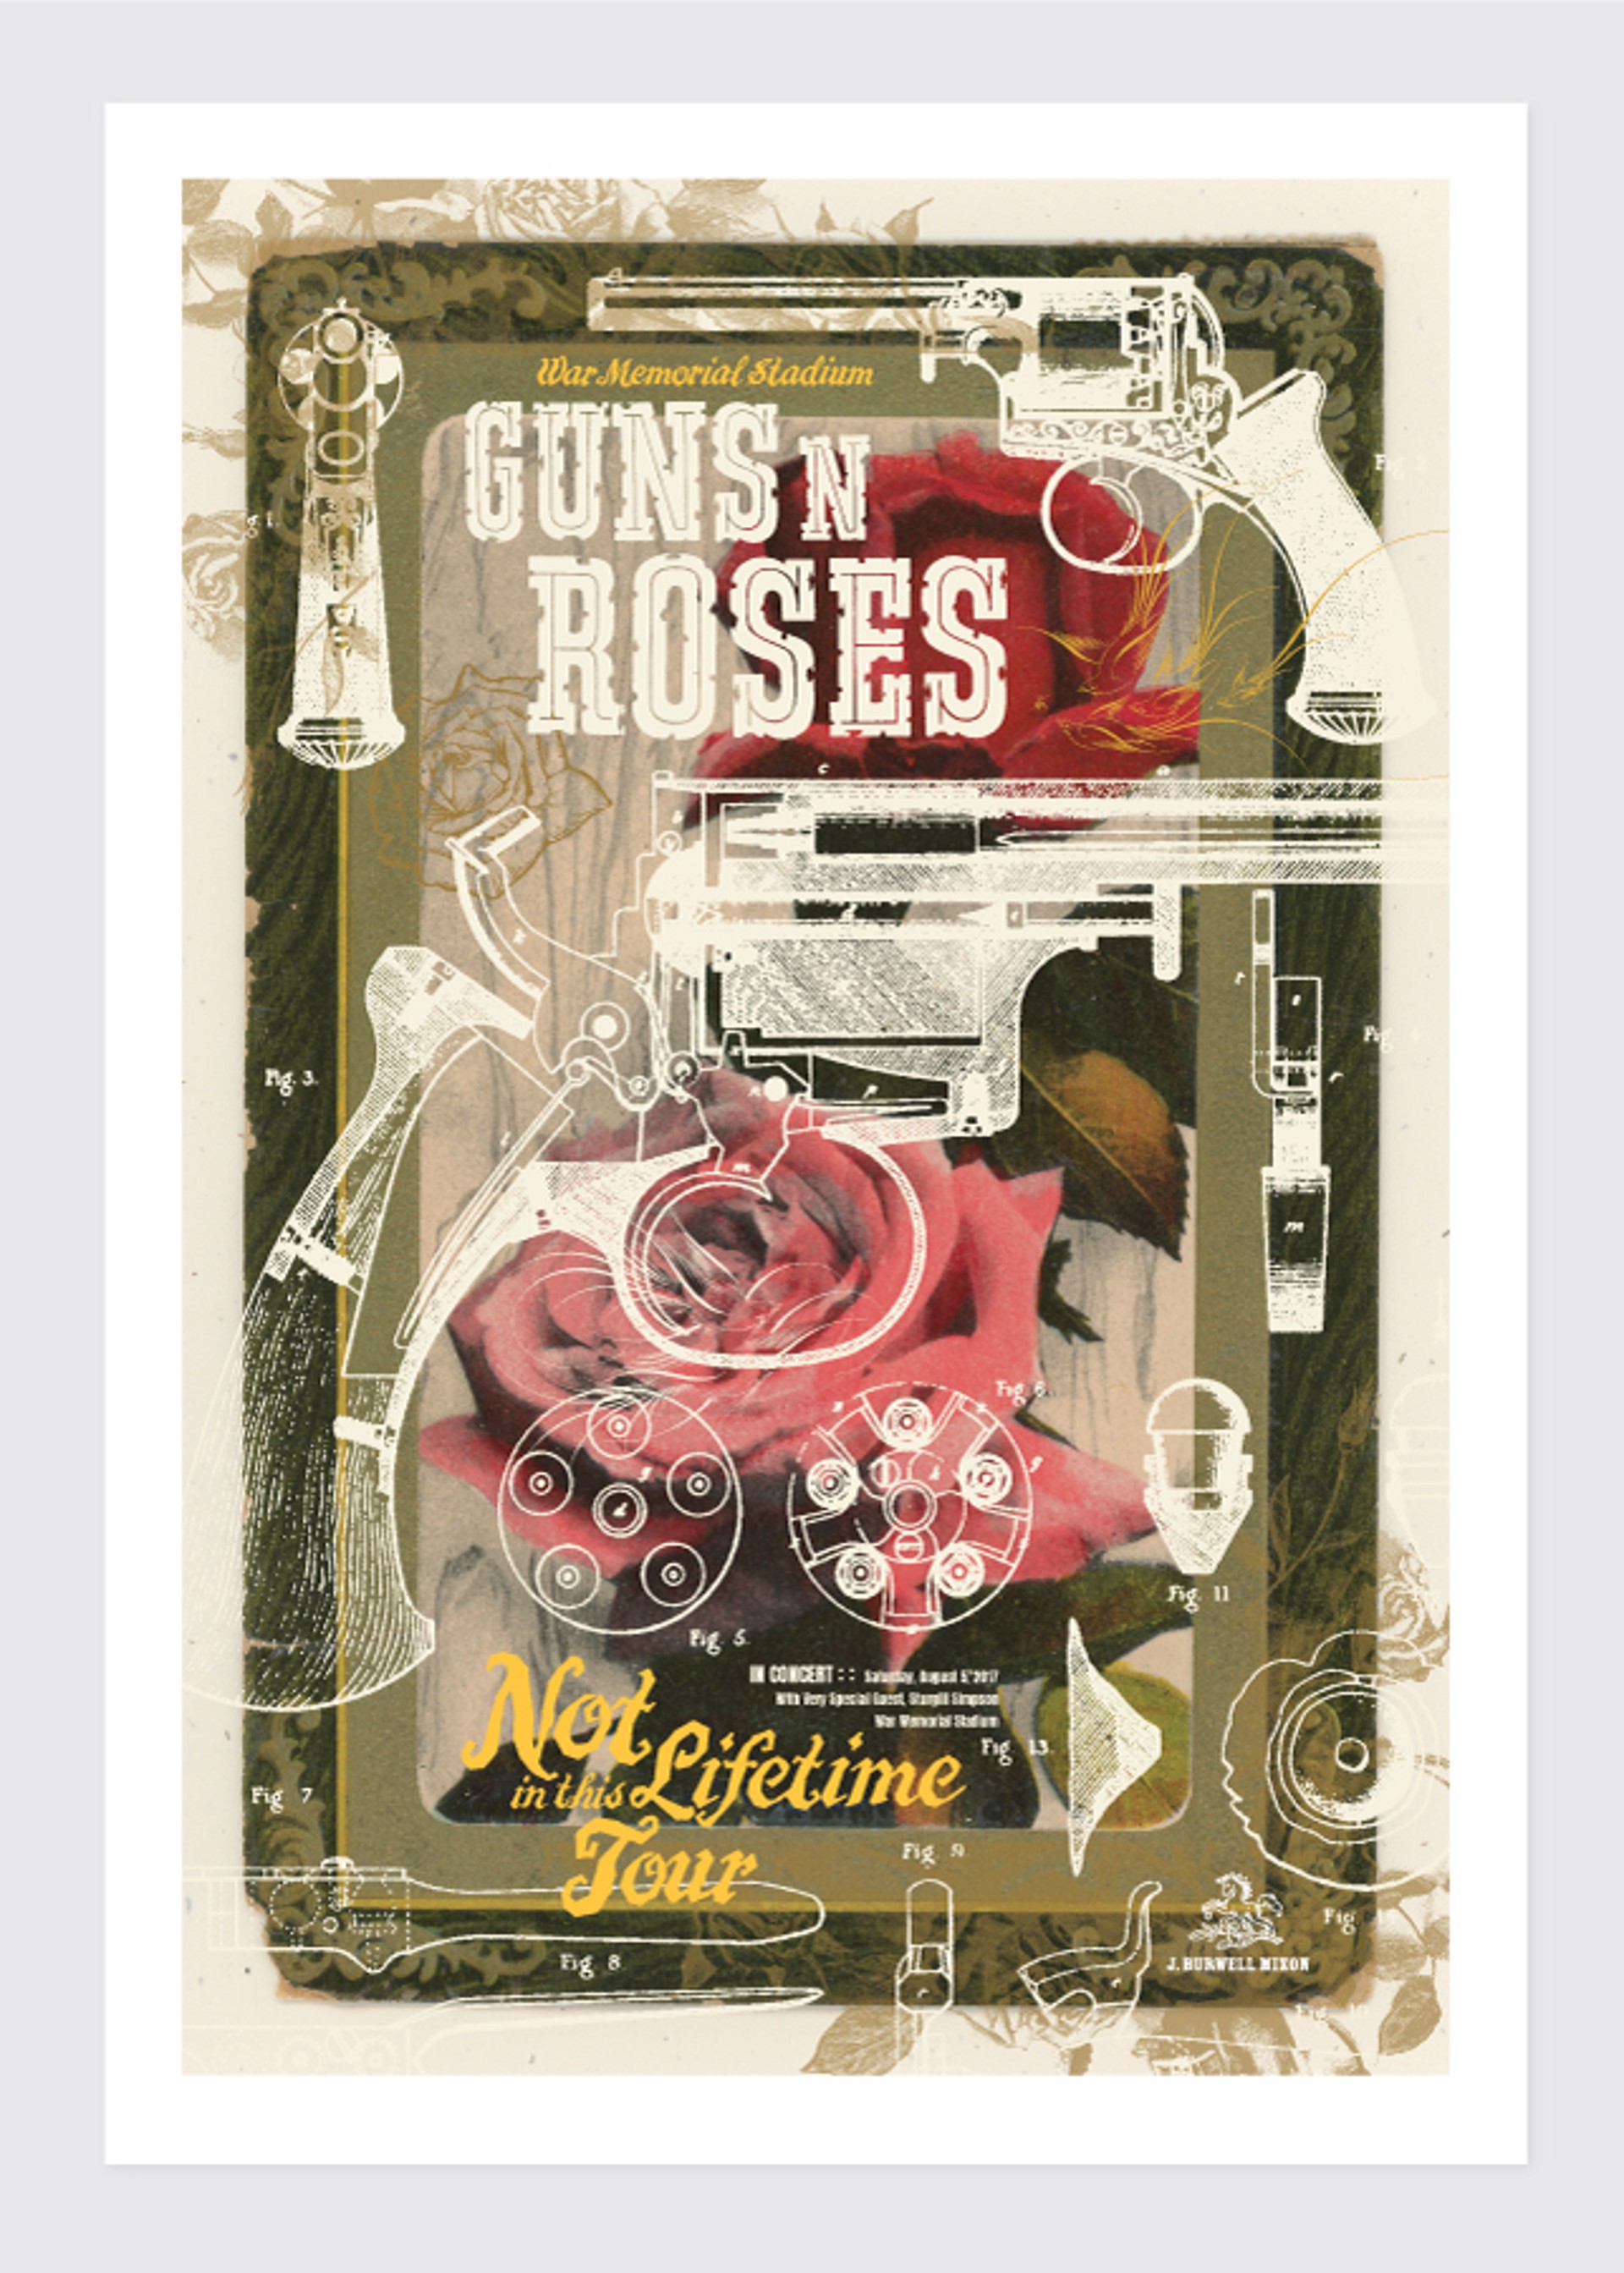 Guns and Roses Concert Poster by Jamie Burwell Mixon